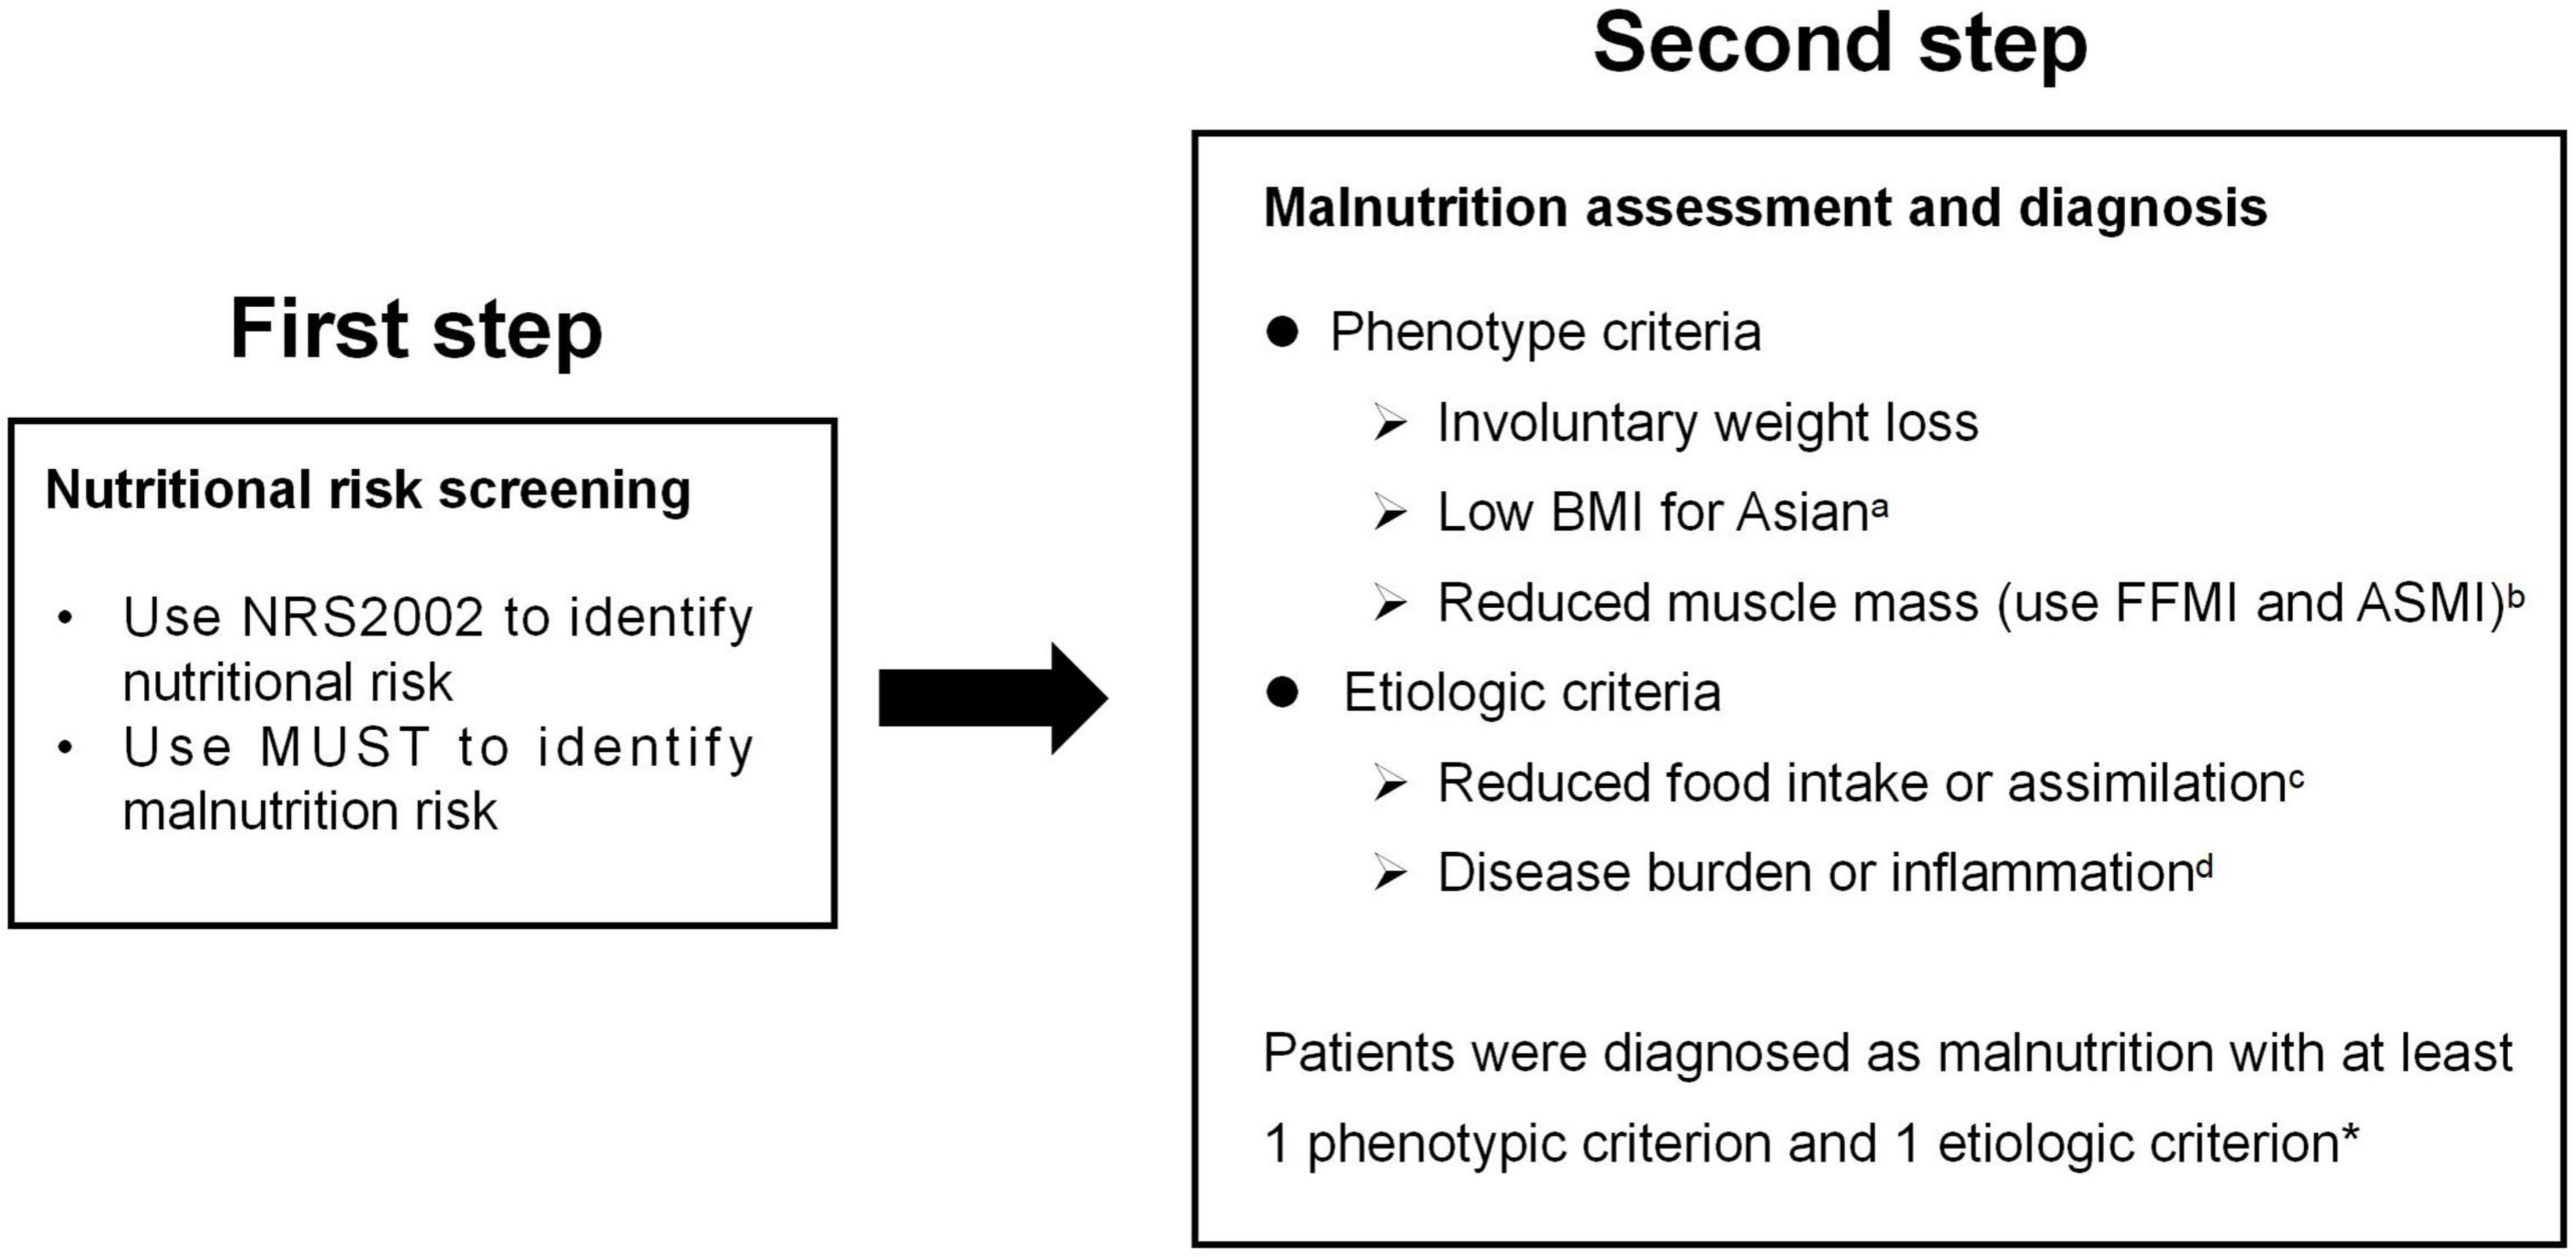 GLIM criteria using NRS-2002 and MUST as the first step adequately diagnose the malnutrition in Crohn’s disease inpatients: A retrospective study